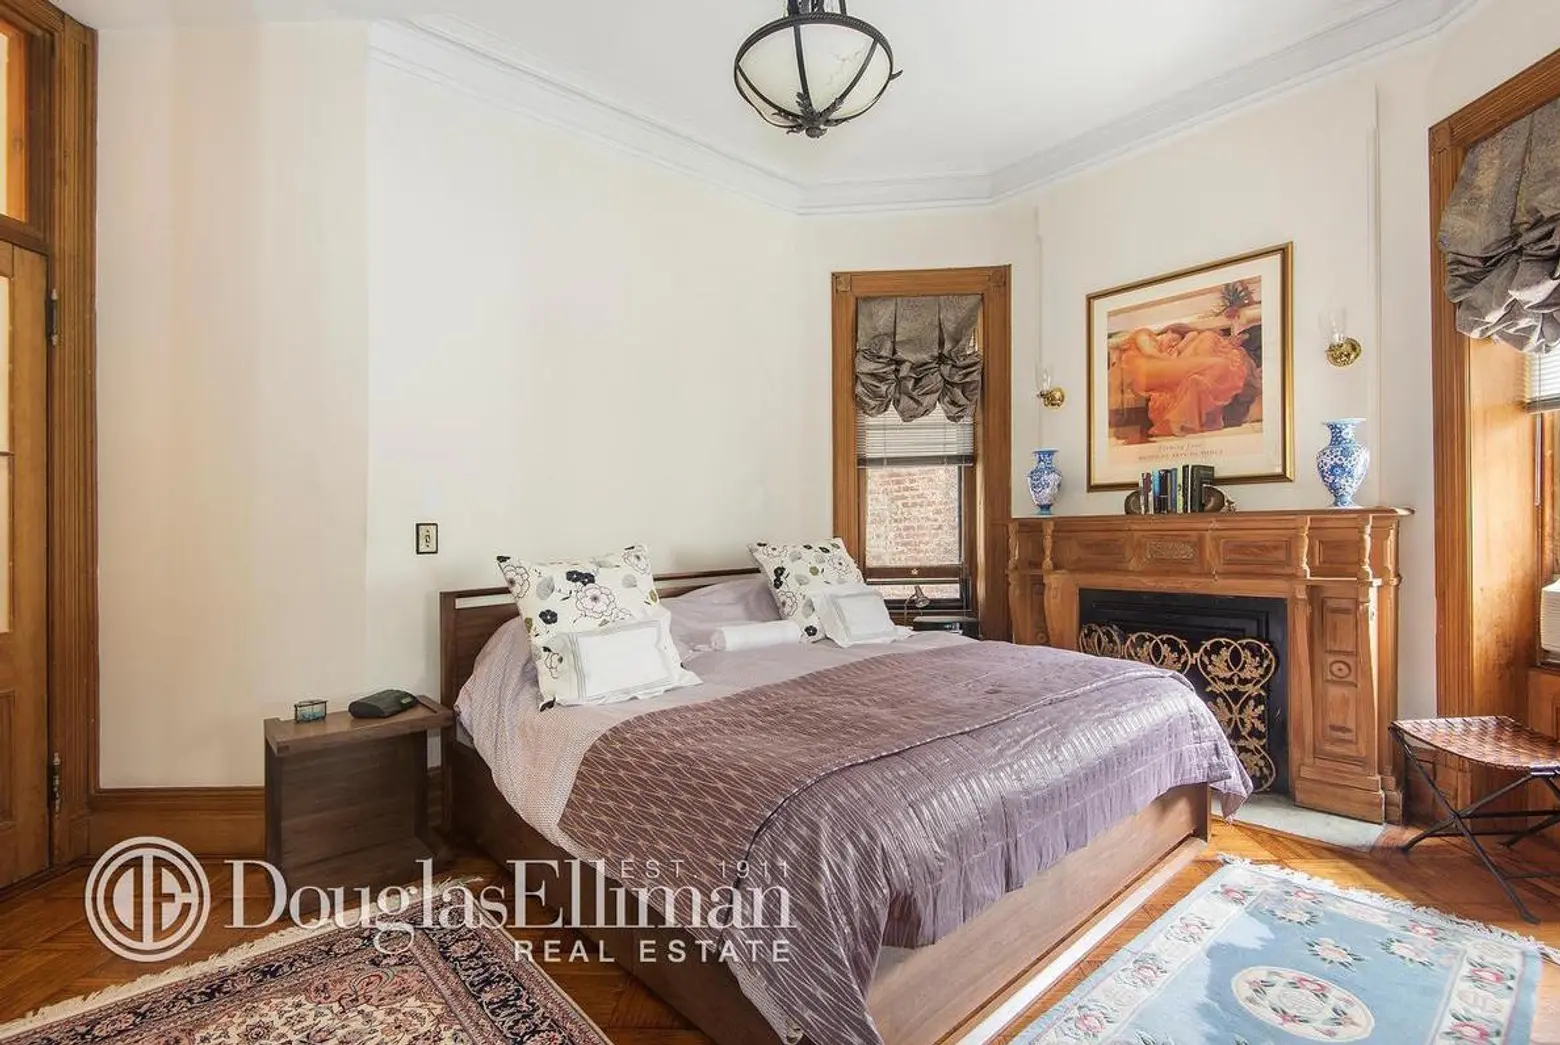 38 West 9th Street, Greenwich Village, Cool Listings, Co-ops for sale, Apartments for sale, three bedroom,